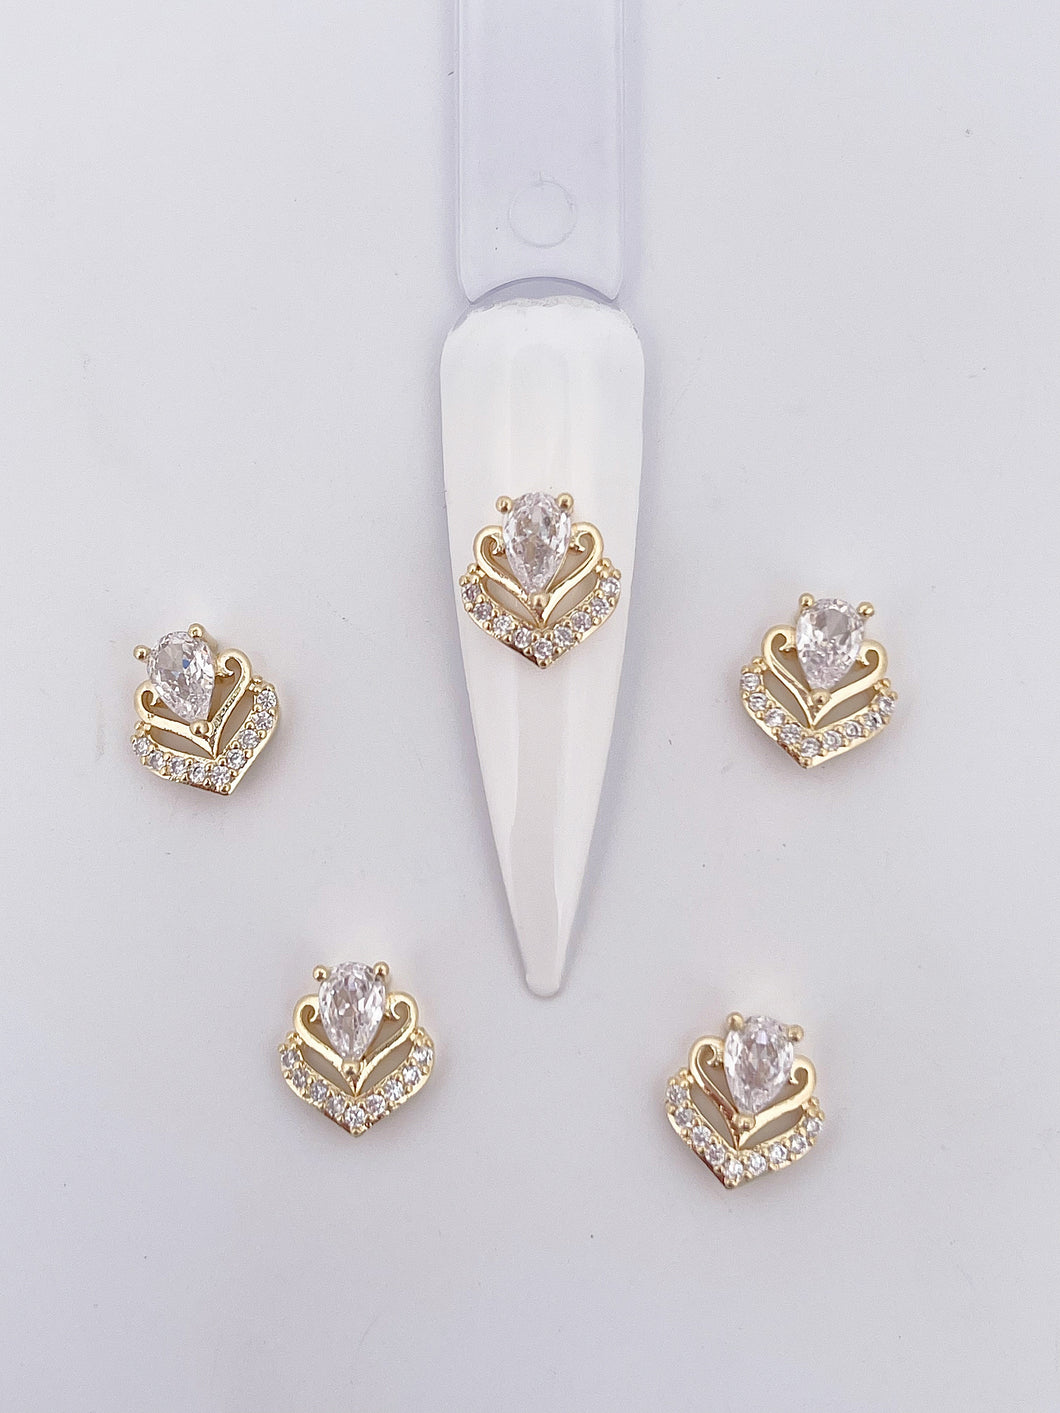 3D Zircon Nail Charms #47 (5 Pieces)